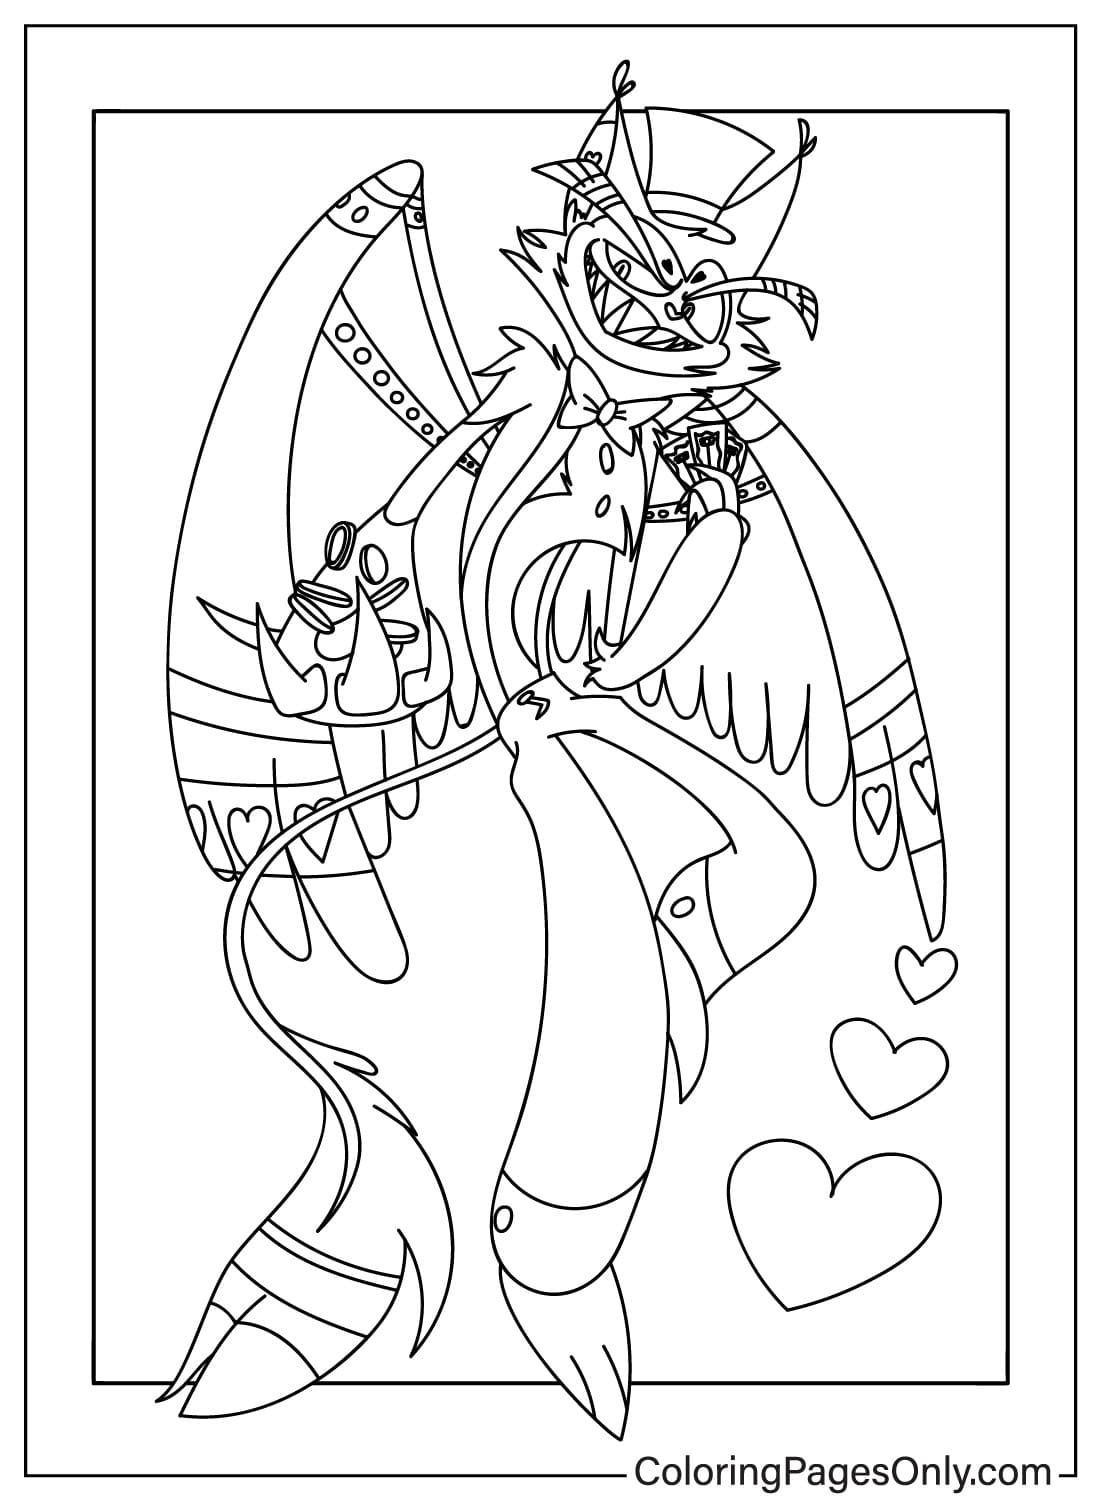 Printable Husk Coloring Page from Husk